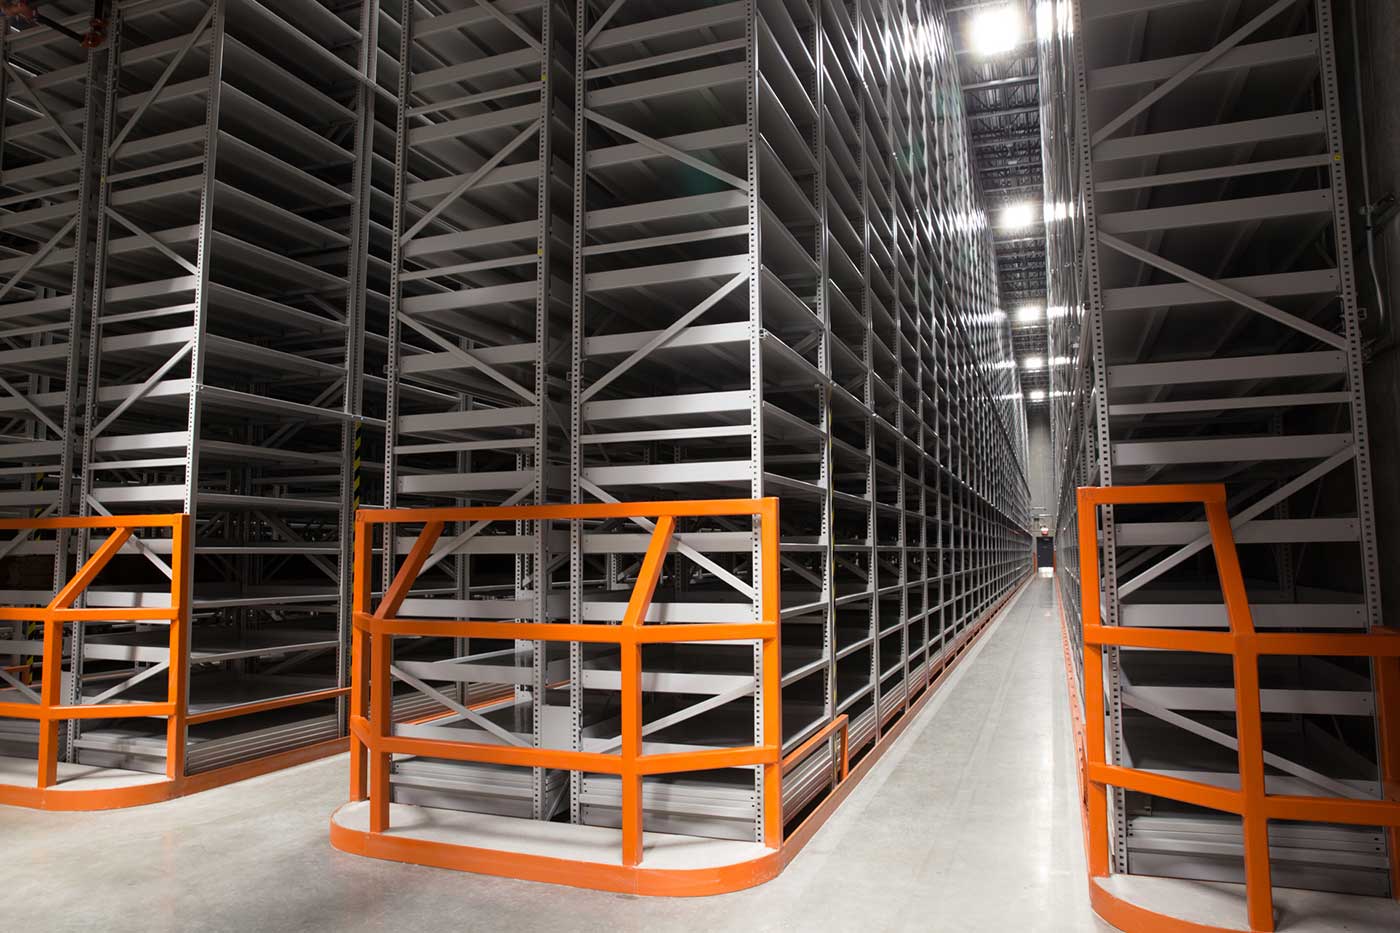 High-bay shelving system in a warehouse